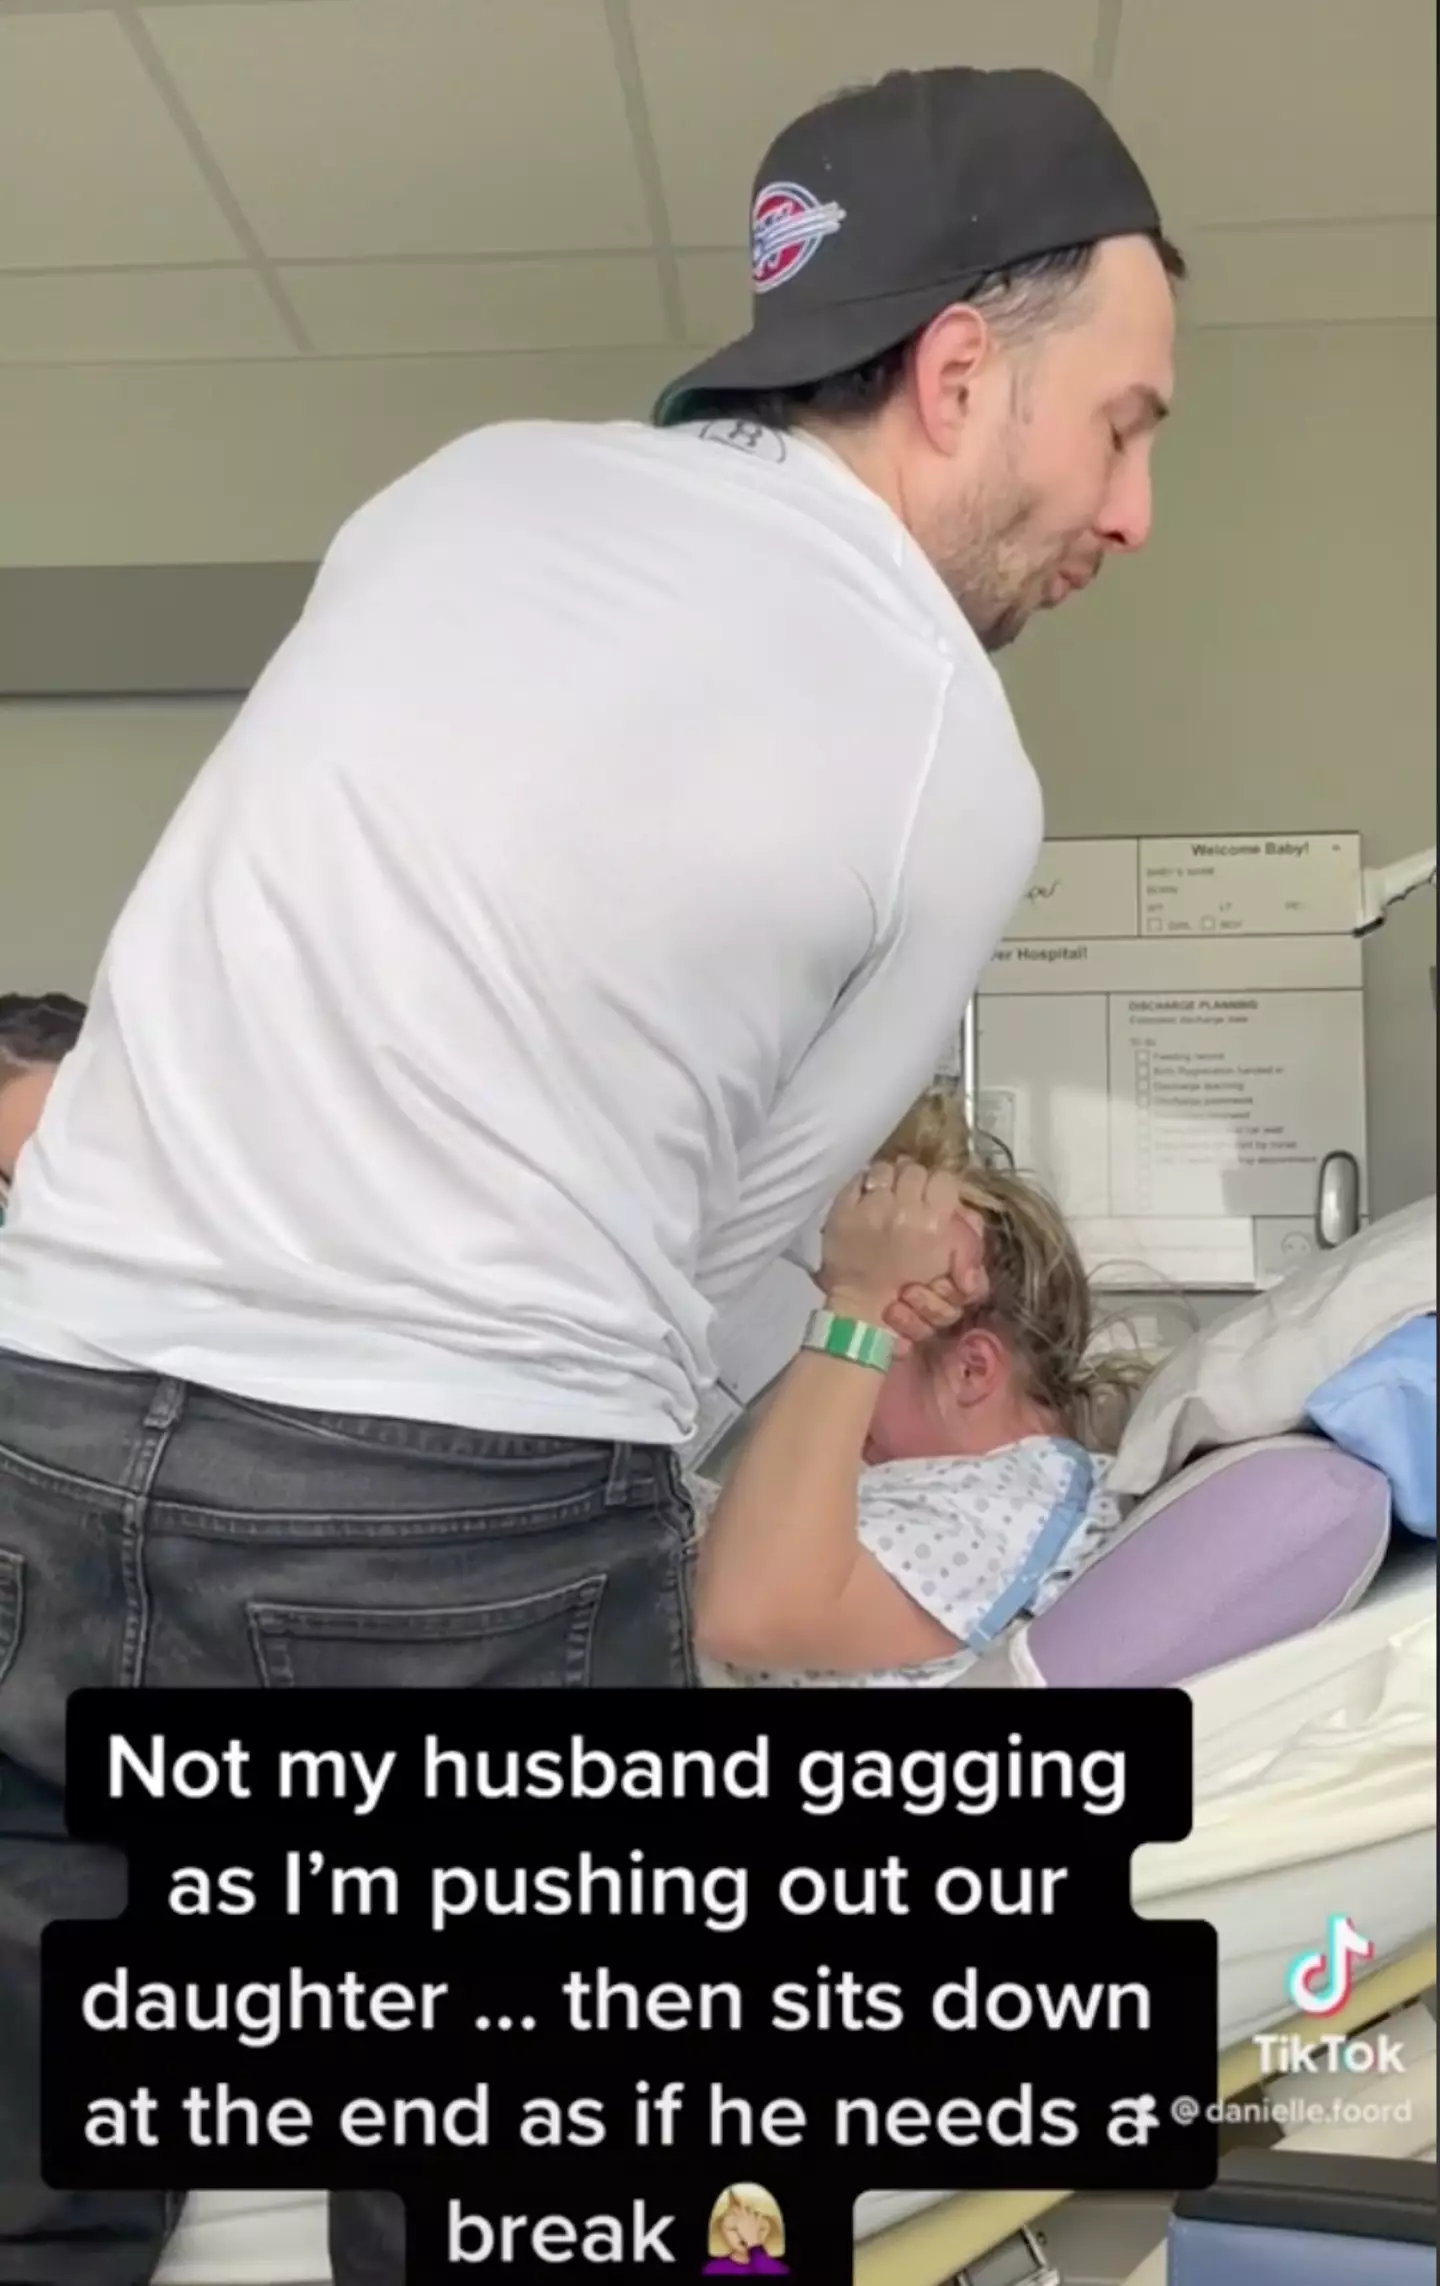 This new dad had a hilarious reaction to his daughter's birth.